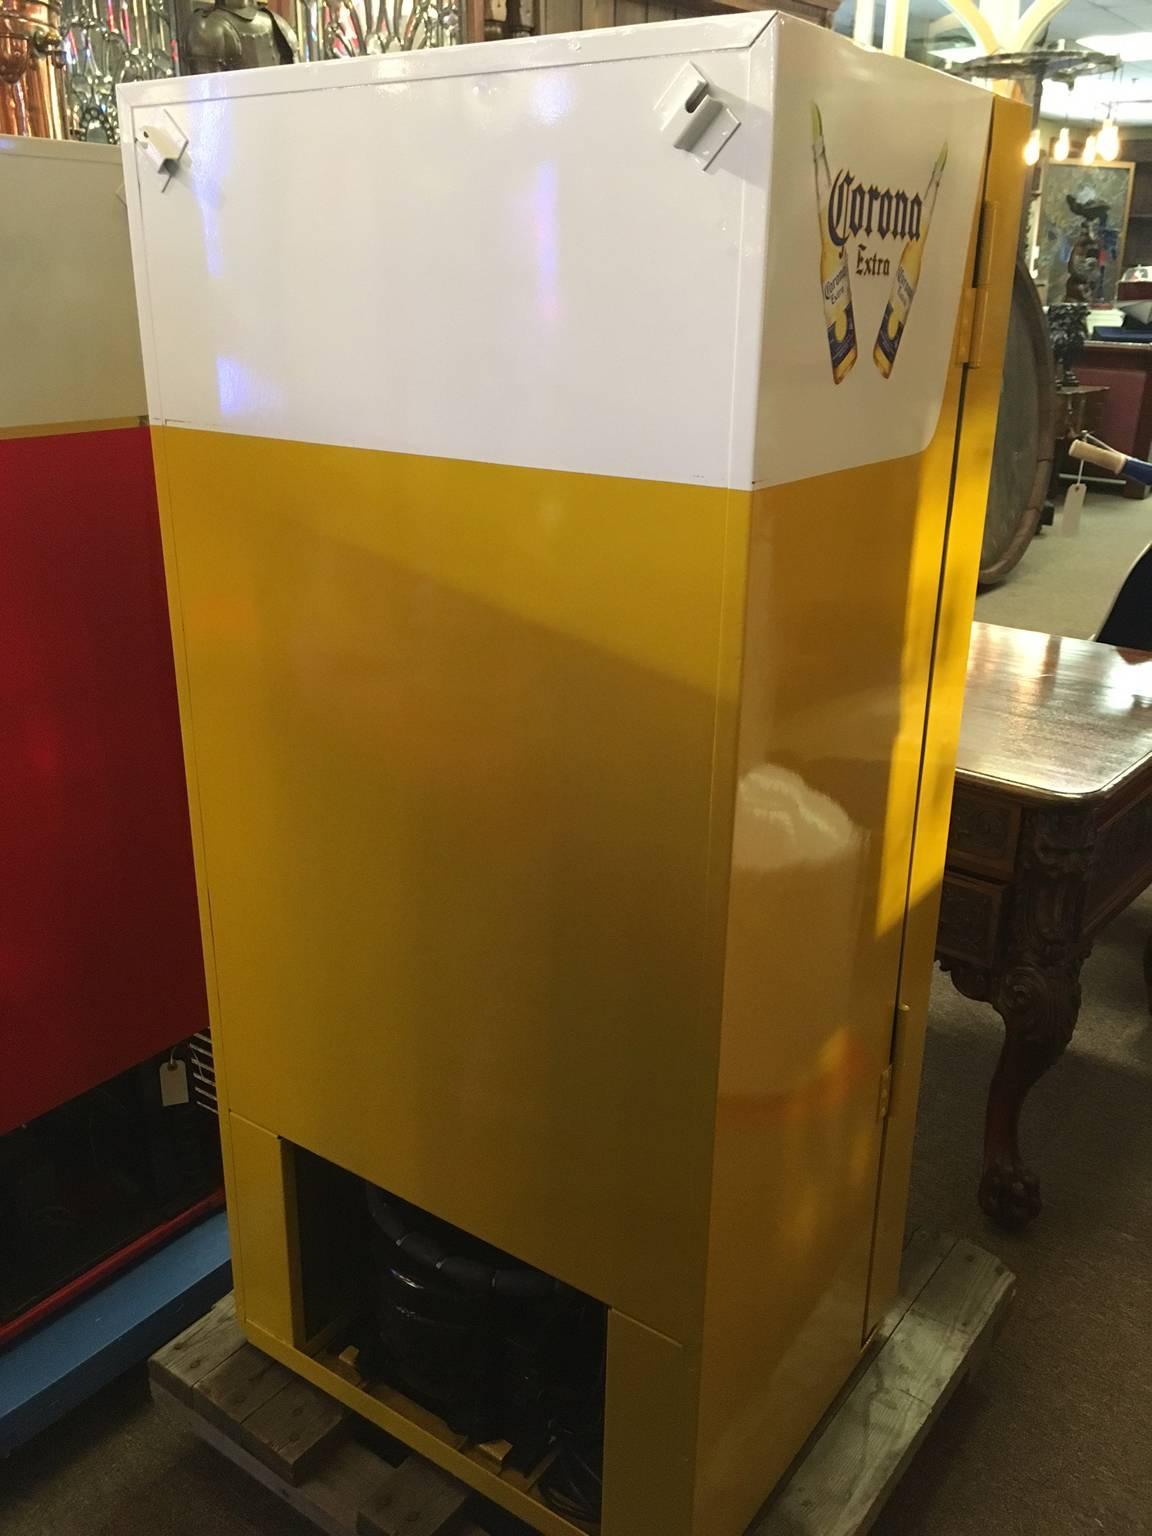 This fully restored Cavalier 64 machine had been customized in a Corona beer theme. Keeps up to 64 beverage bottles cold at a time and has keys. Perfect for a man cave or game room!